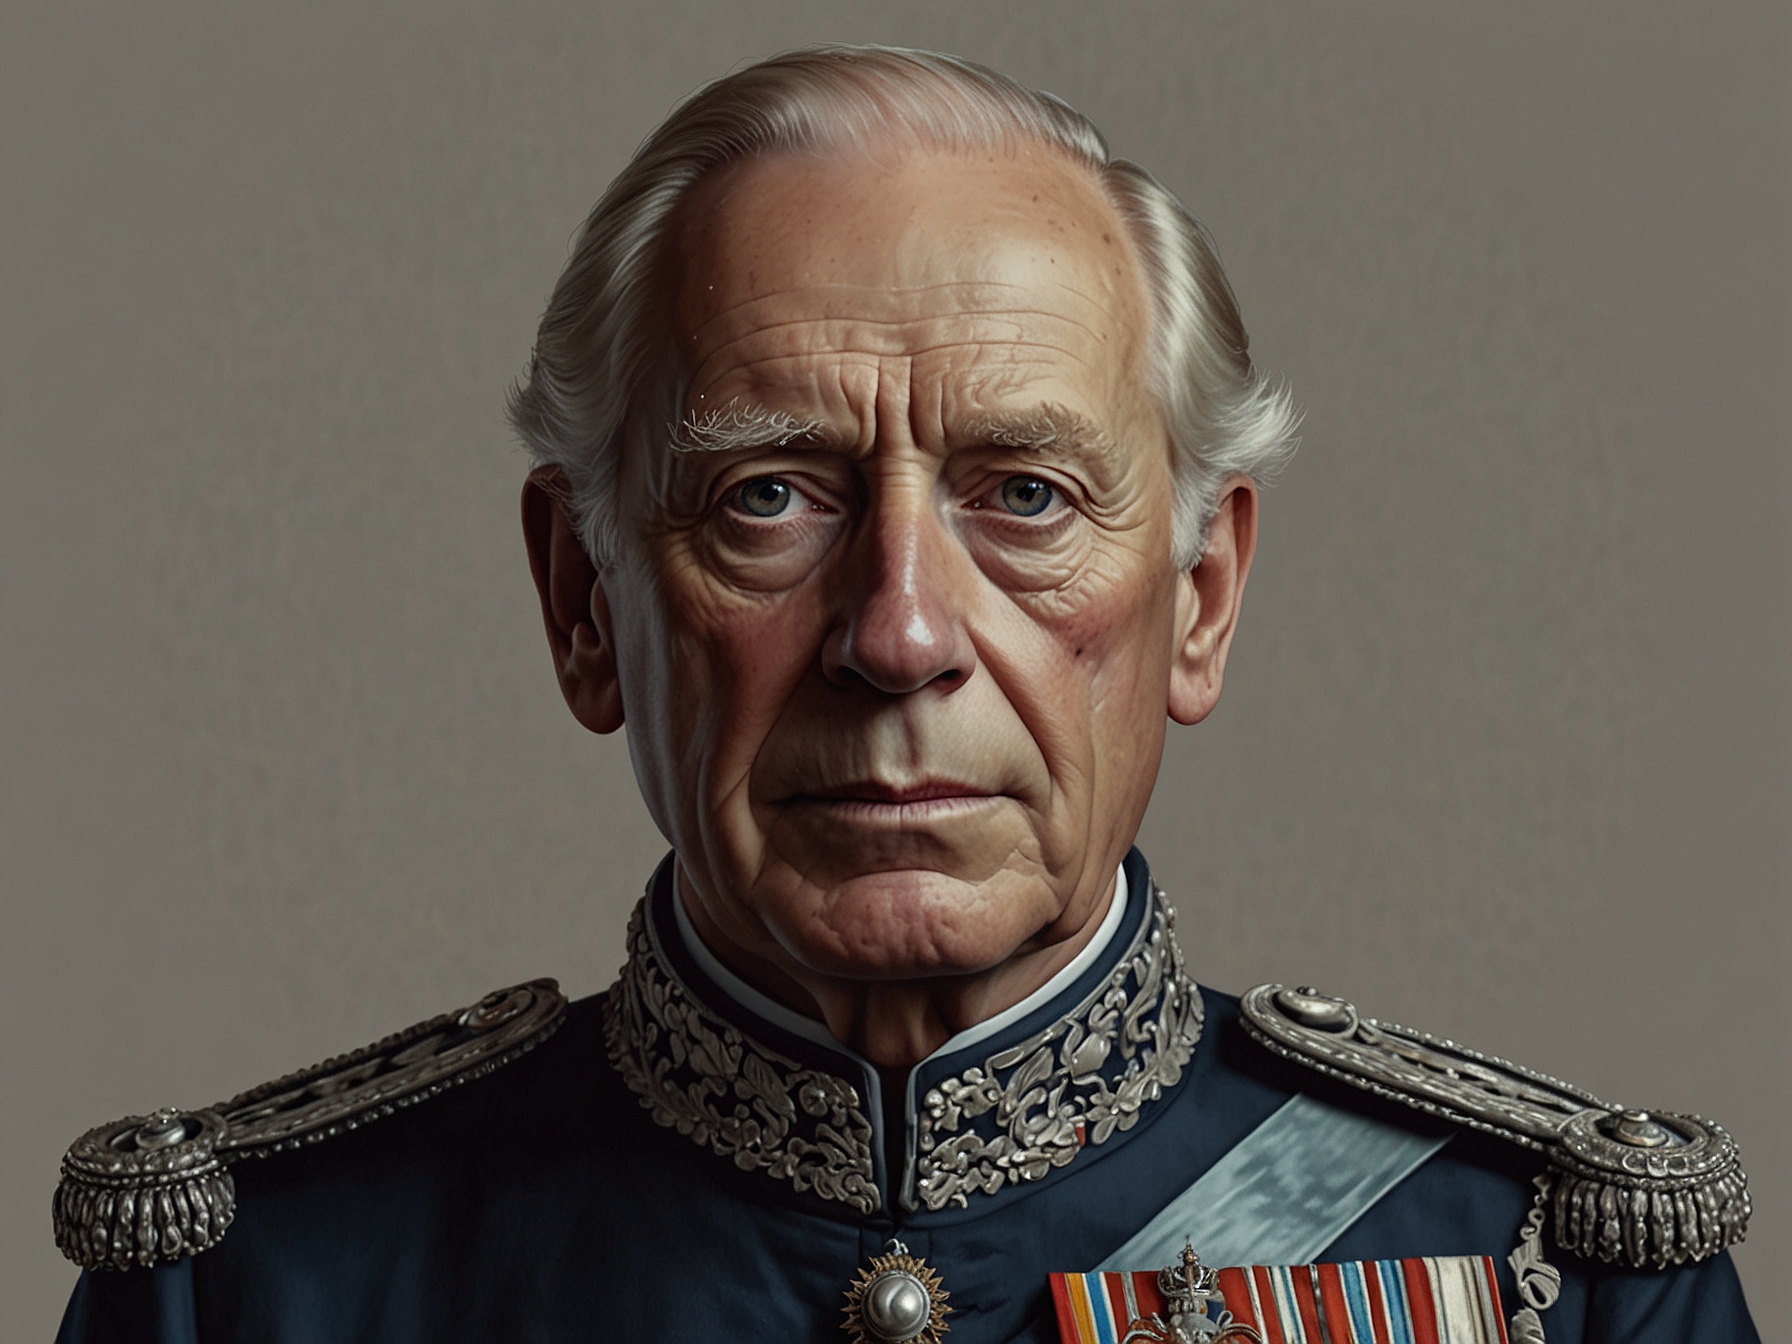 King Charles III, in regal attire, with a steadfast expression, embodying his commitment to preserving the traditional values and structure of the British monarchy.